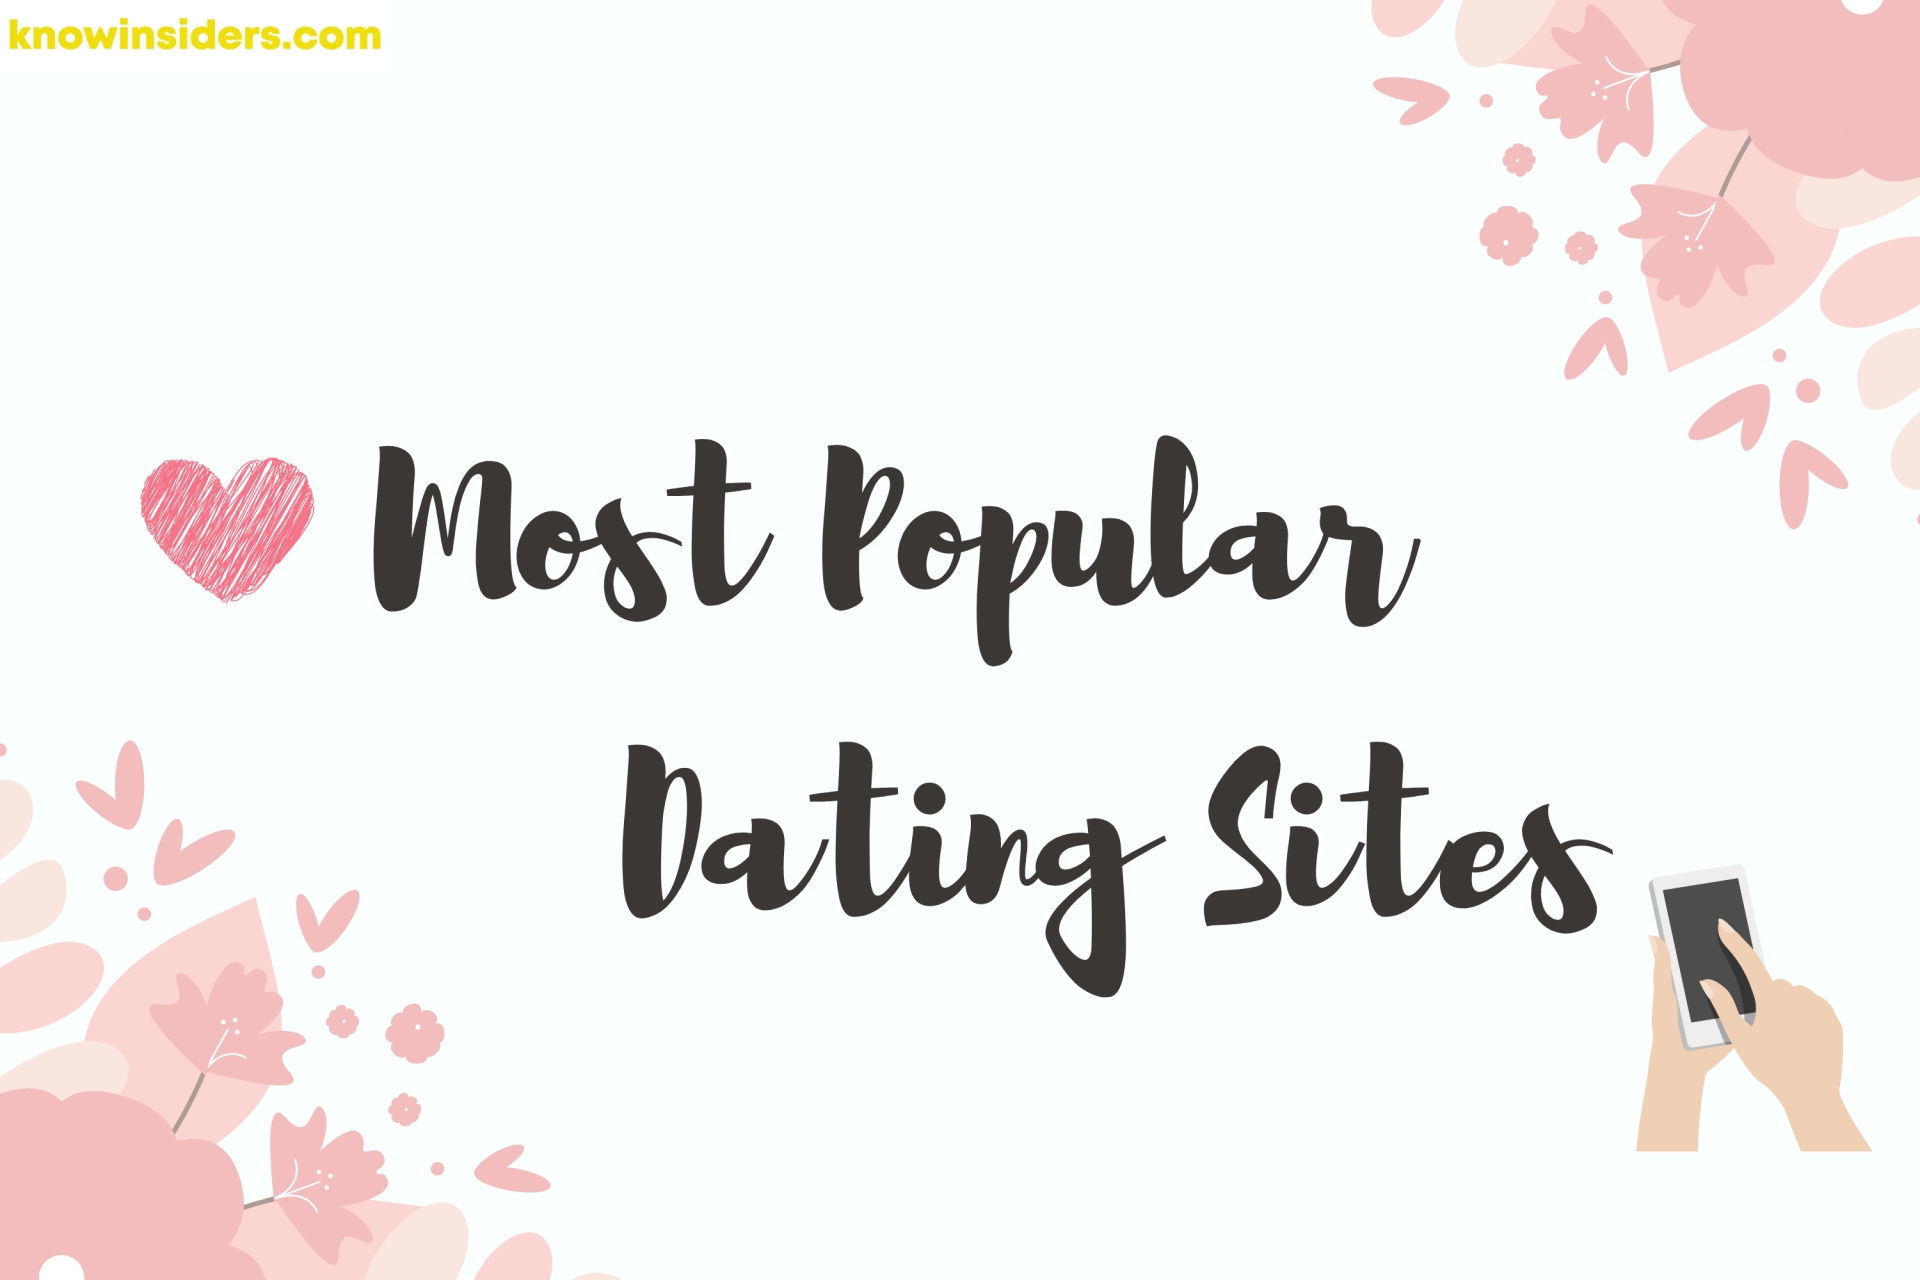 Top 10 Most Popular Dating Sites For Singles